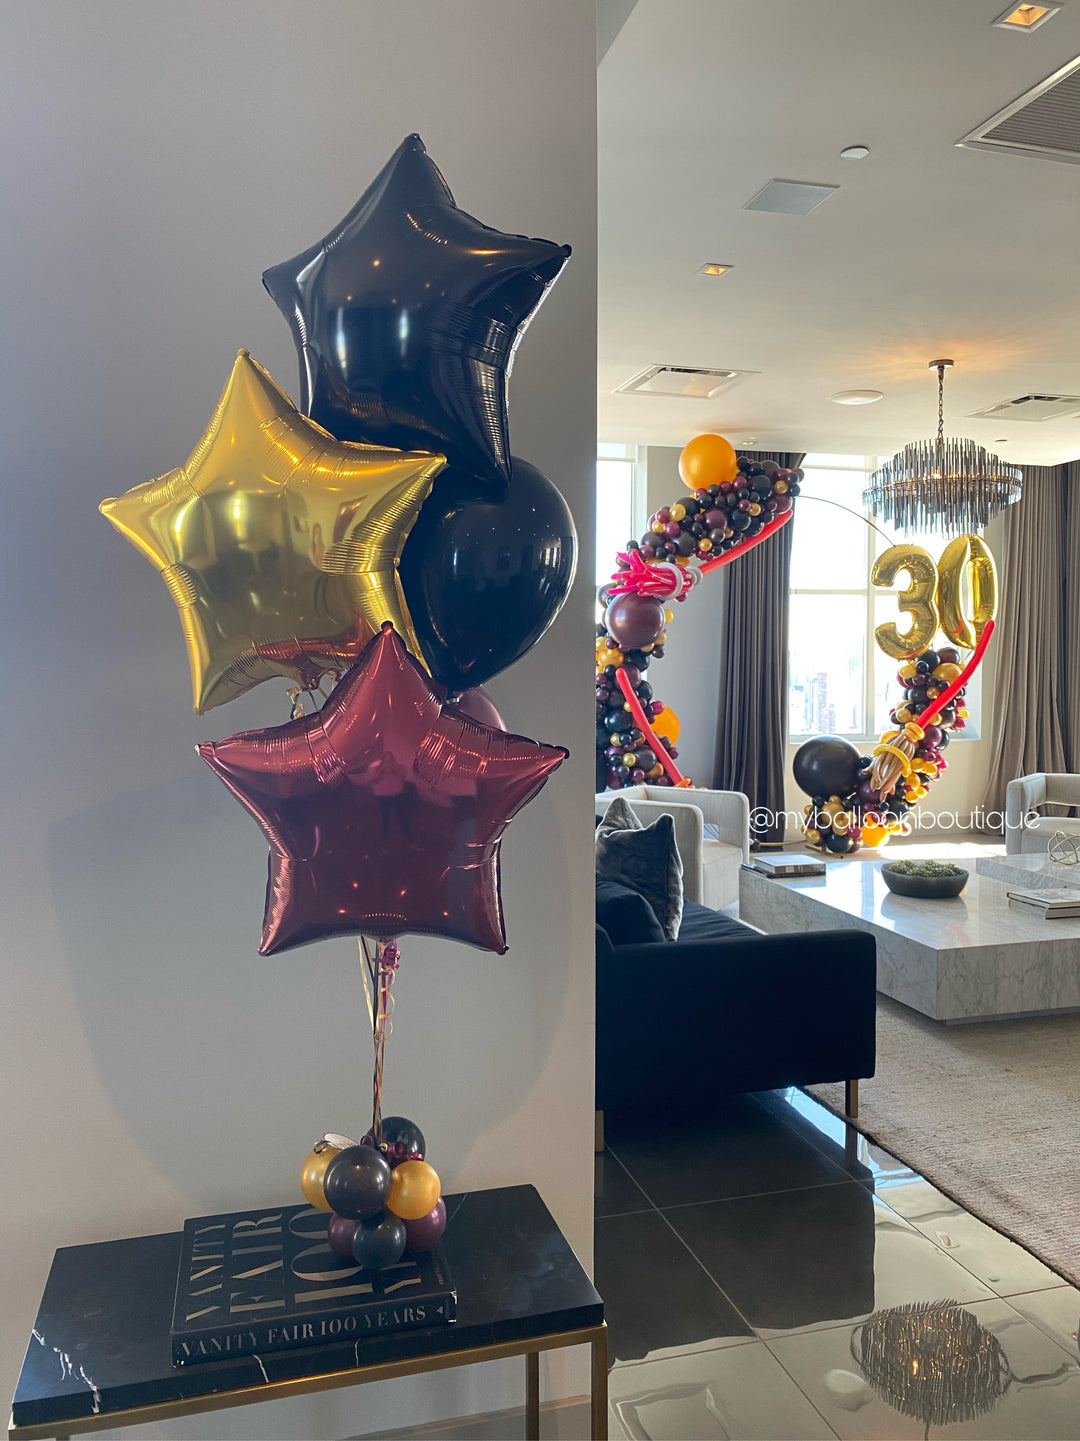 Centerpiece of 6 with Mylar & Latex Balloons